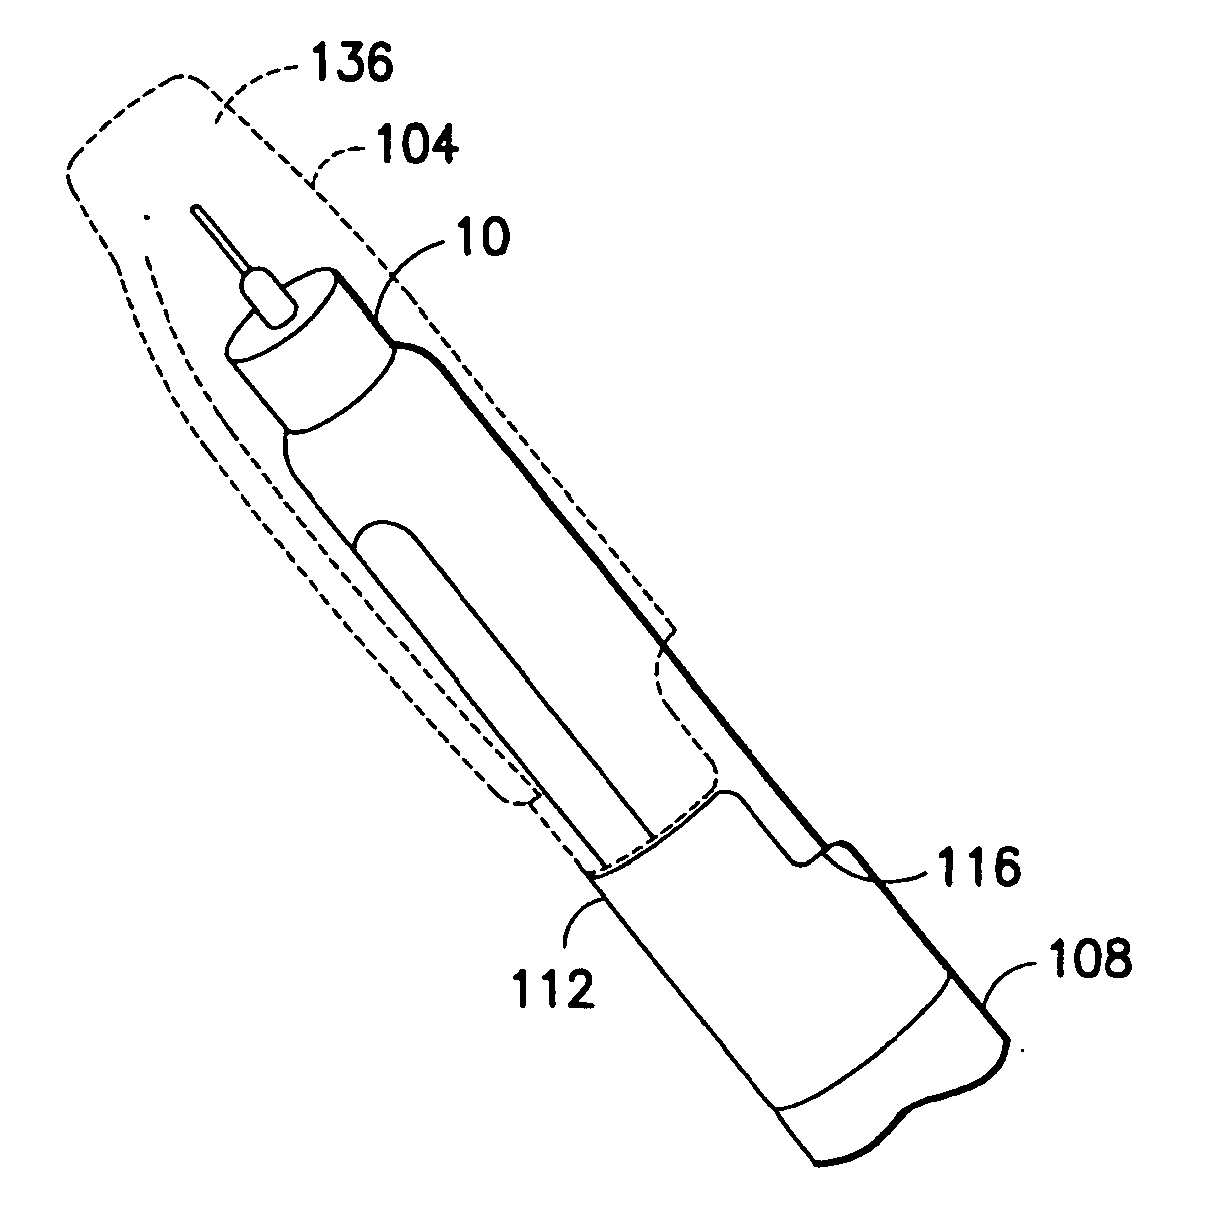 Self-Injection Device with Multi-Position Cap